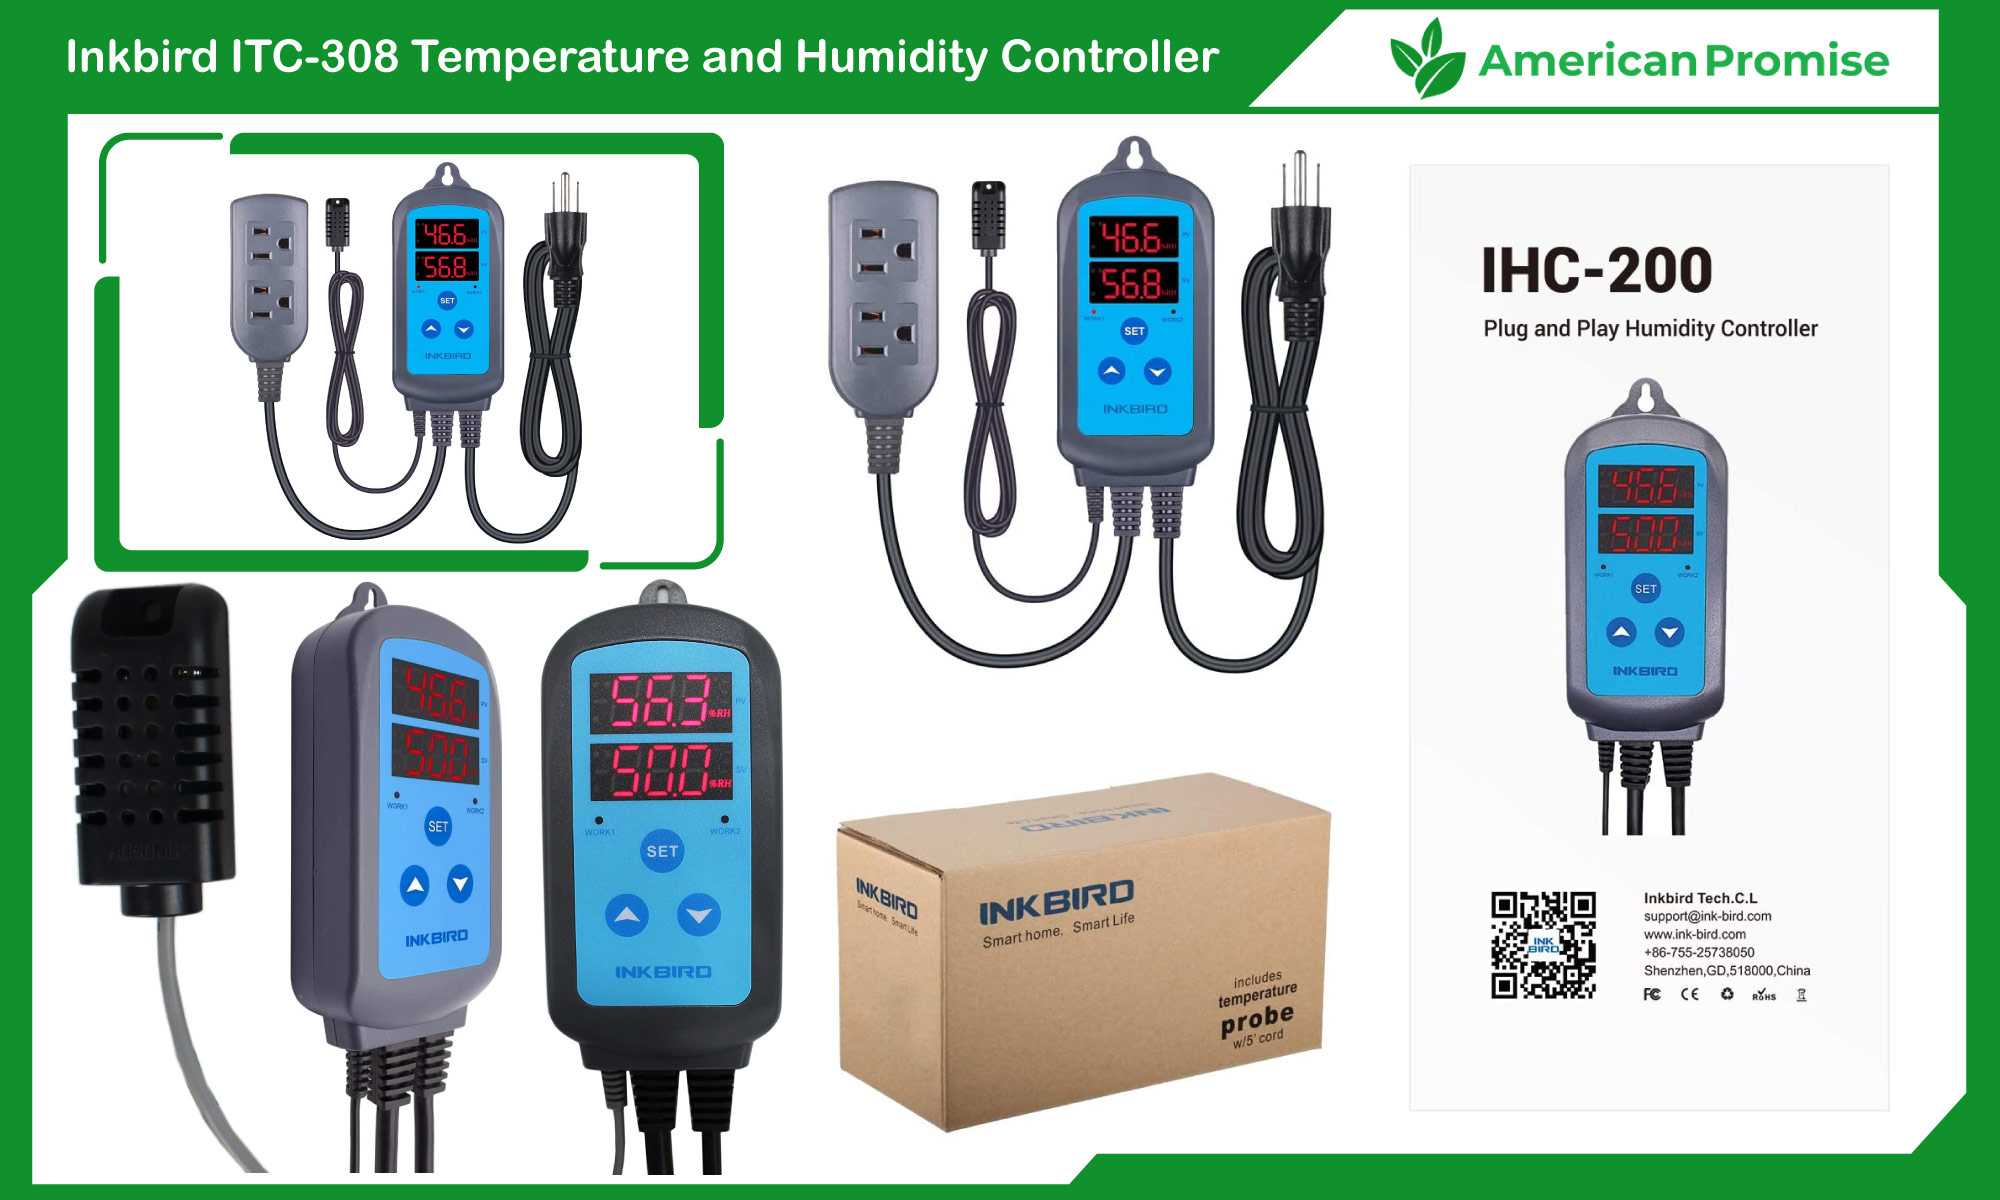 Inkbird ITC-308 Temperature and Humidity Controller